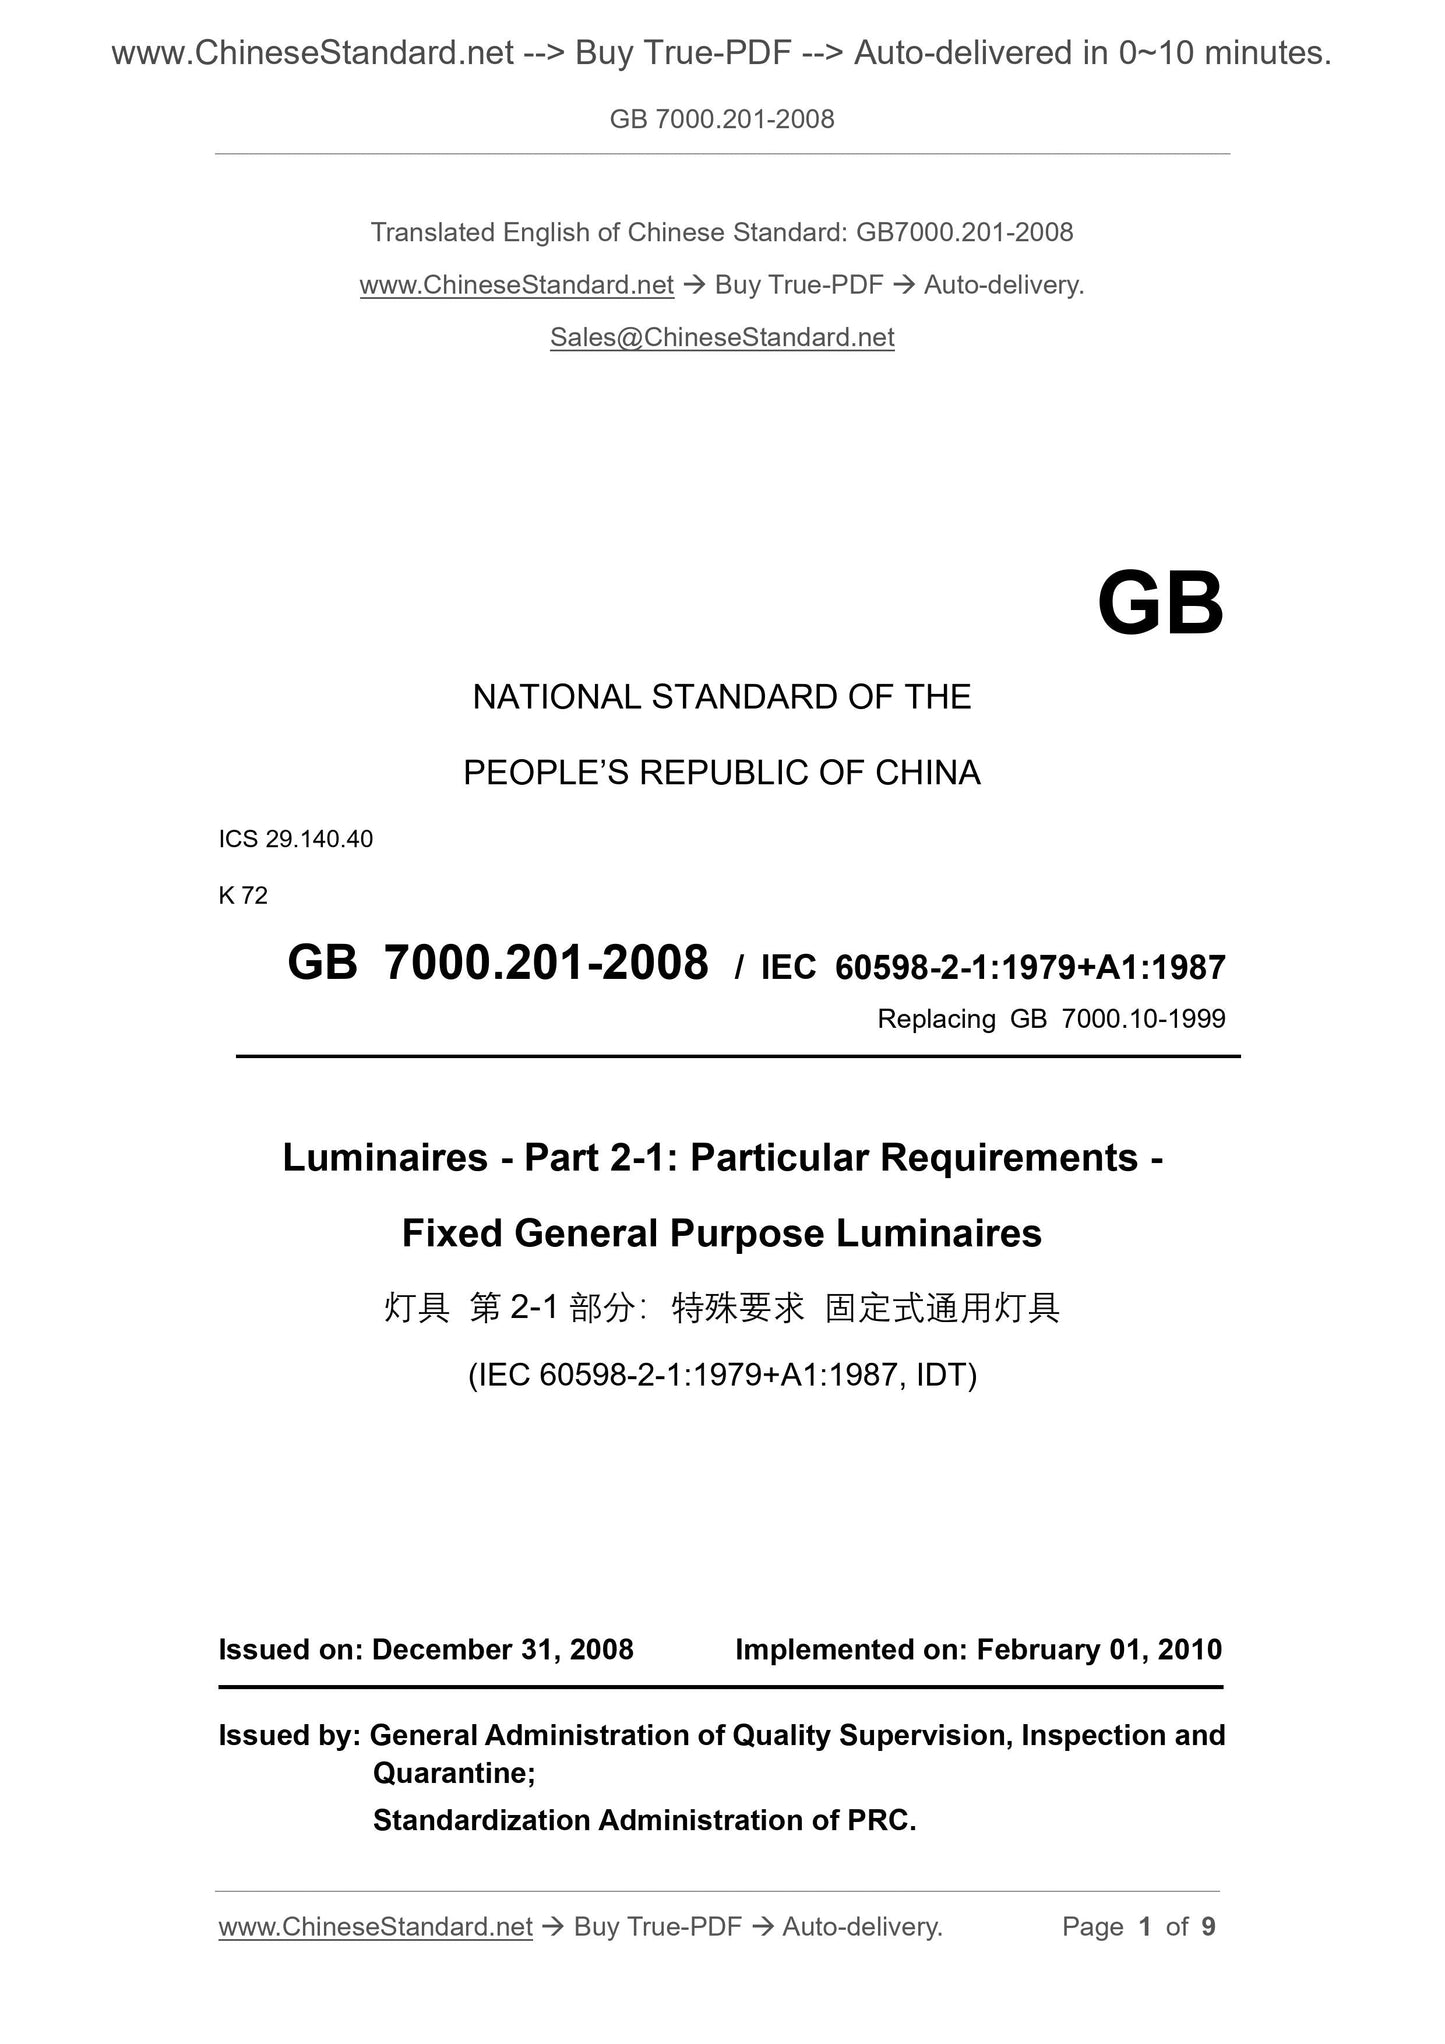 GB 7000.201-2008 Page 1